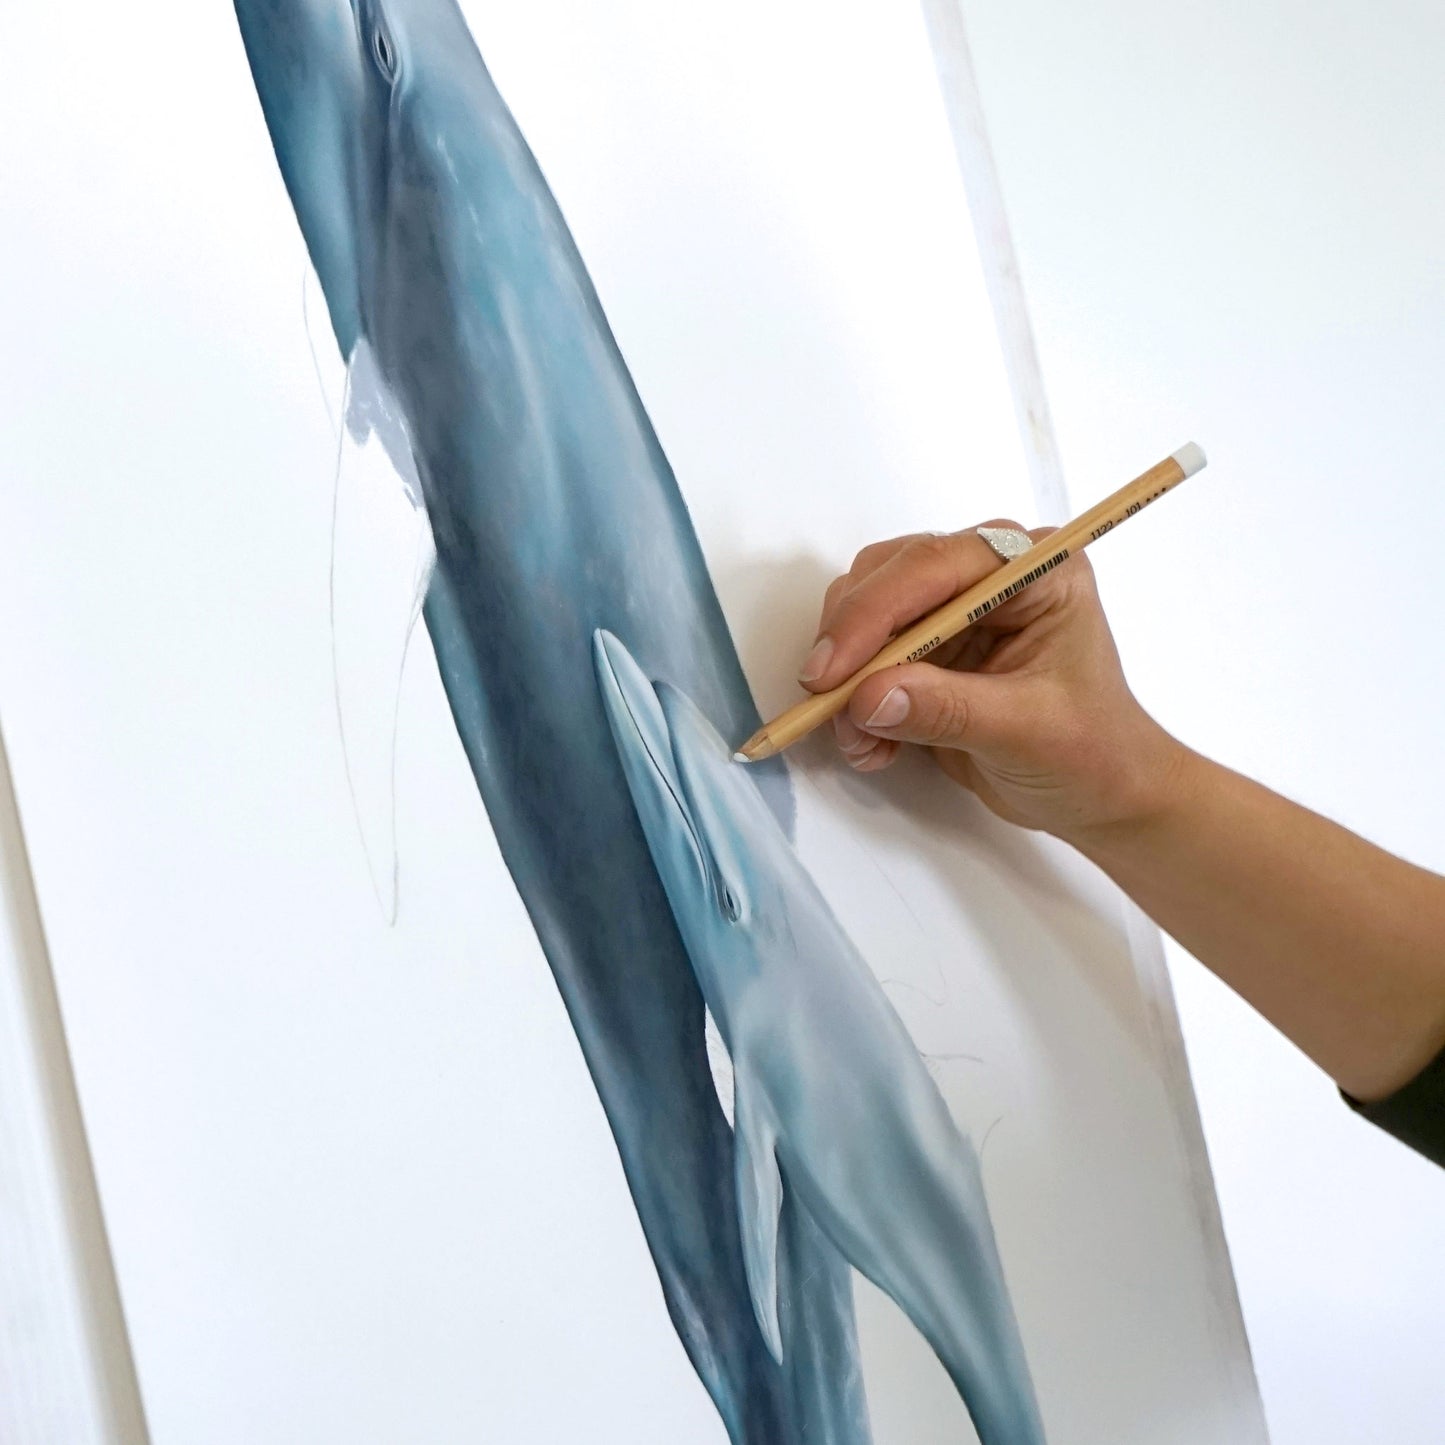 artwork of bottlenose dolphin being created